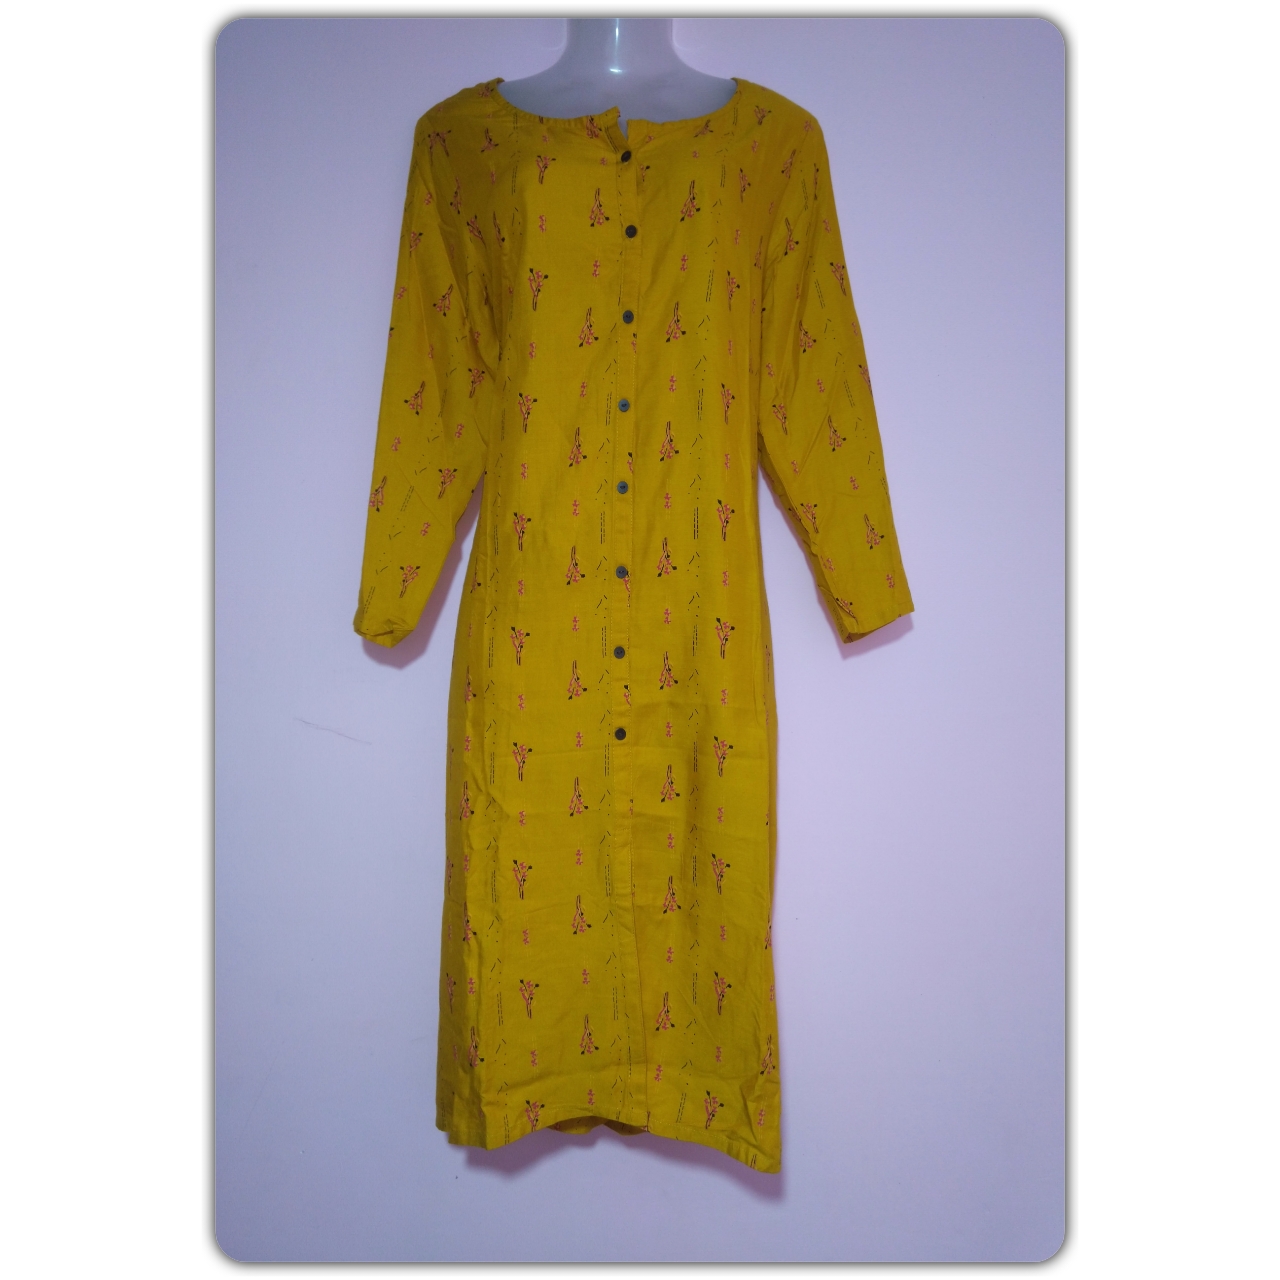 Buy Plain Work Kurtis Online from our Latest Collection